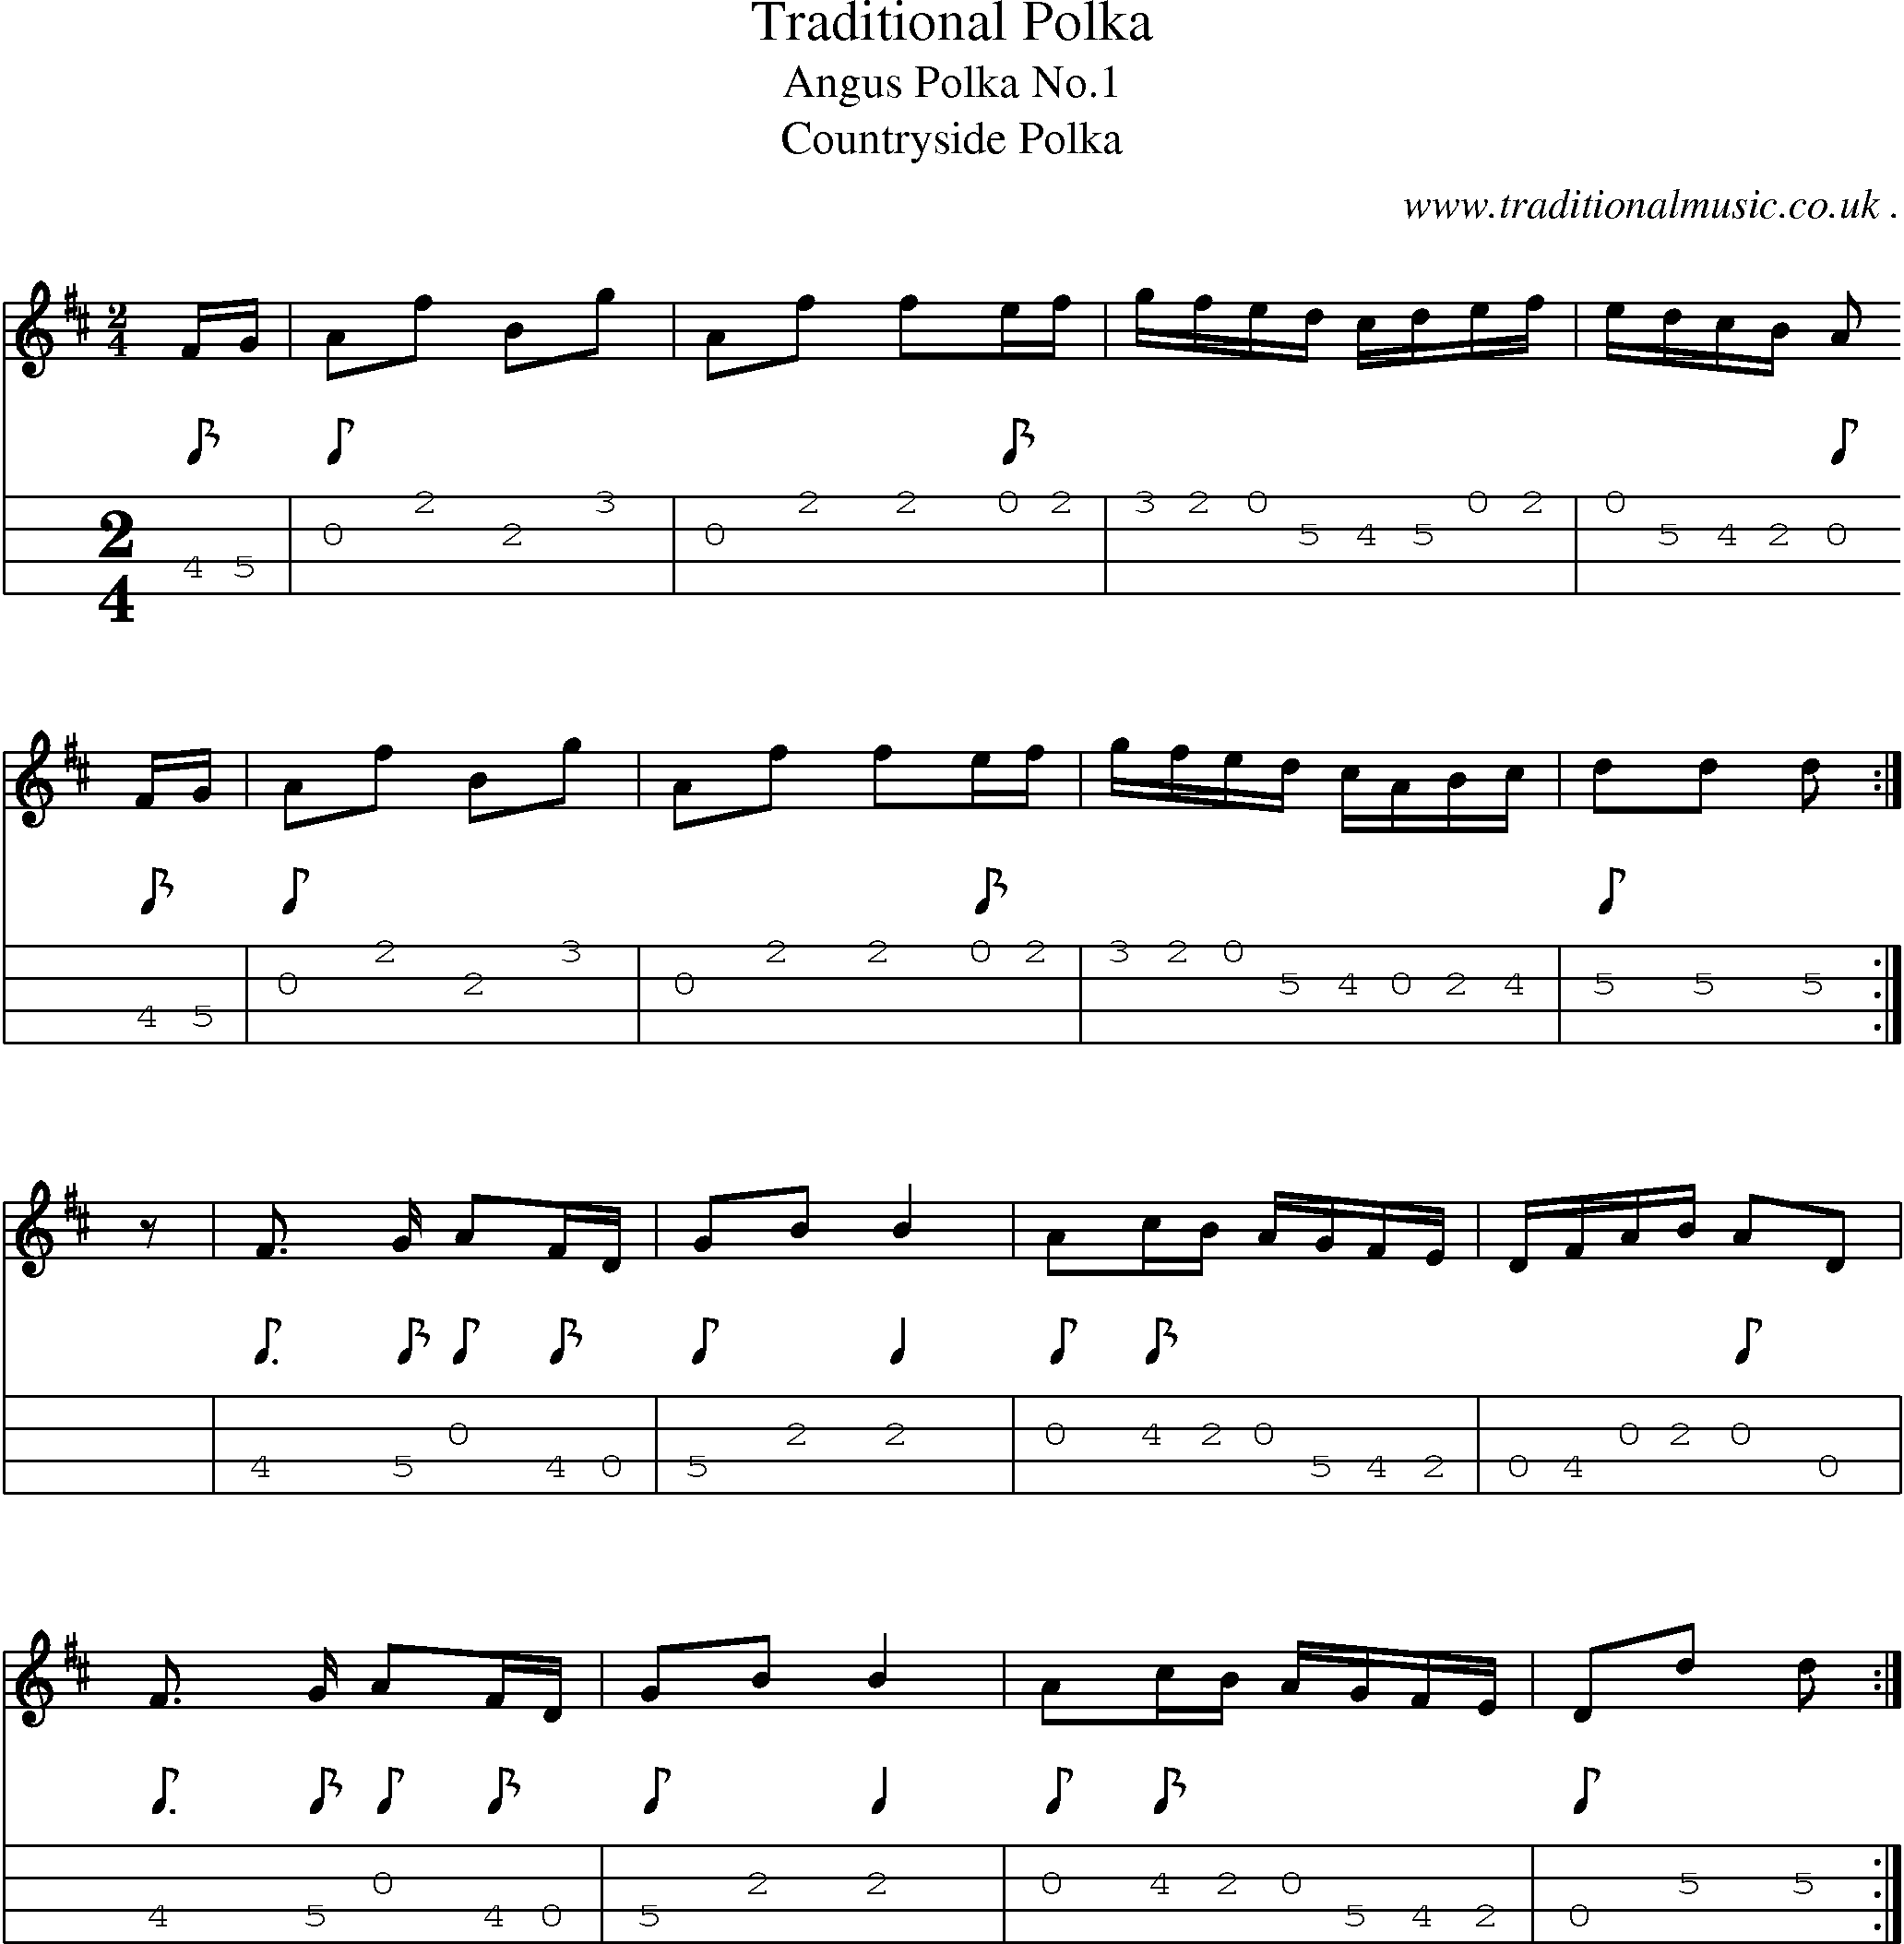 Sheet-music  score, Chords and Mandolin Tabs for Traditional Polka